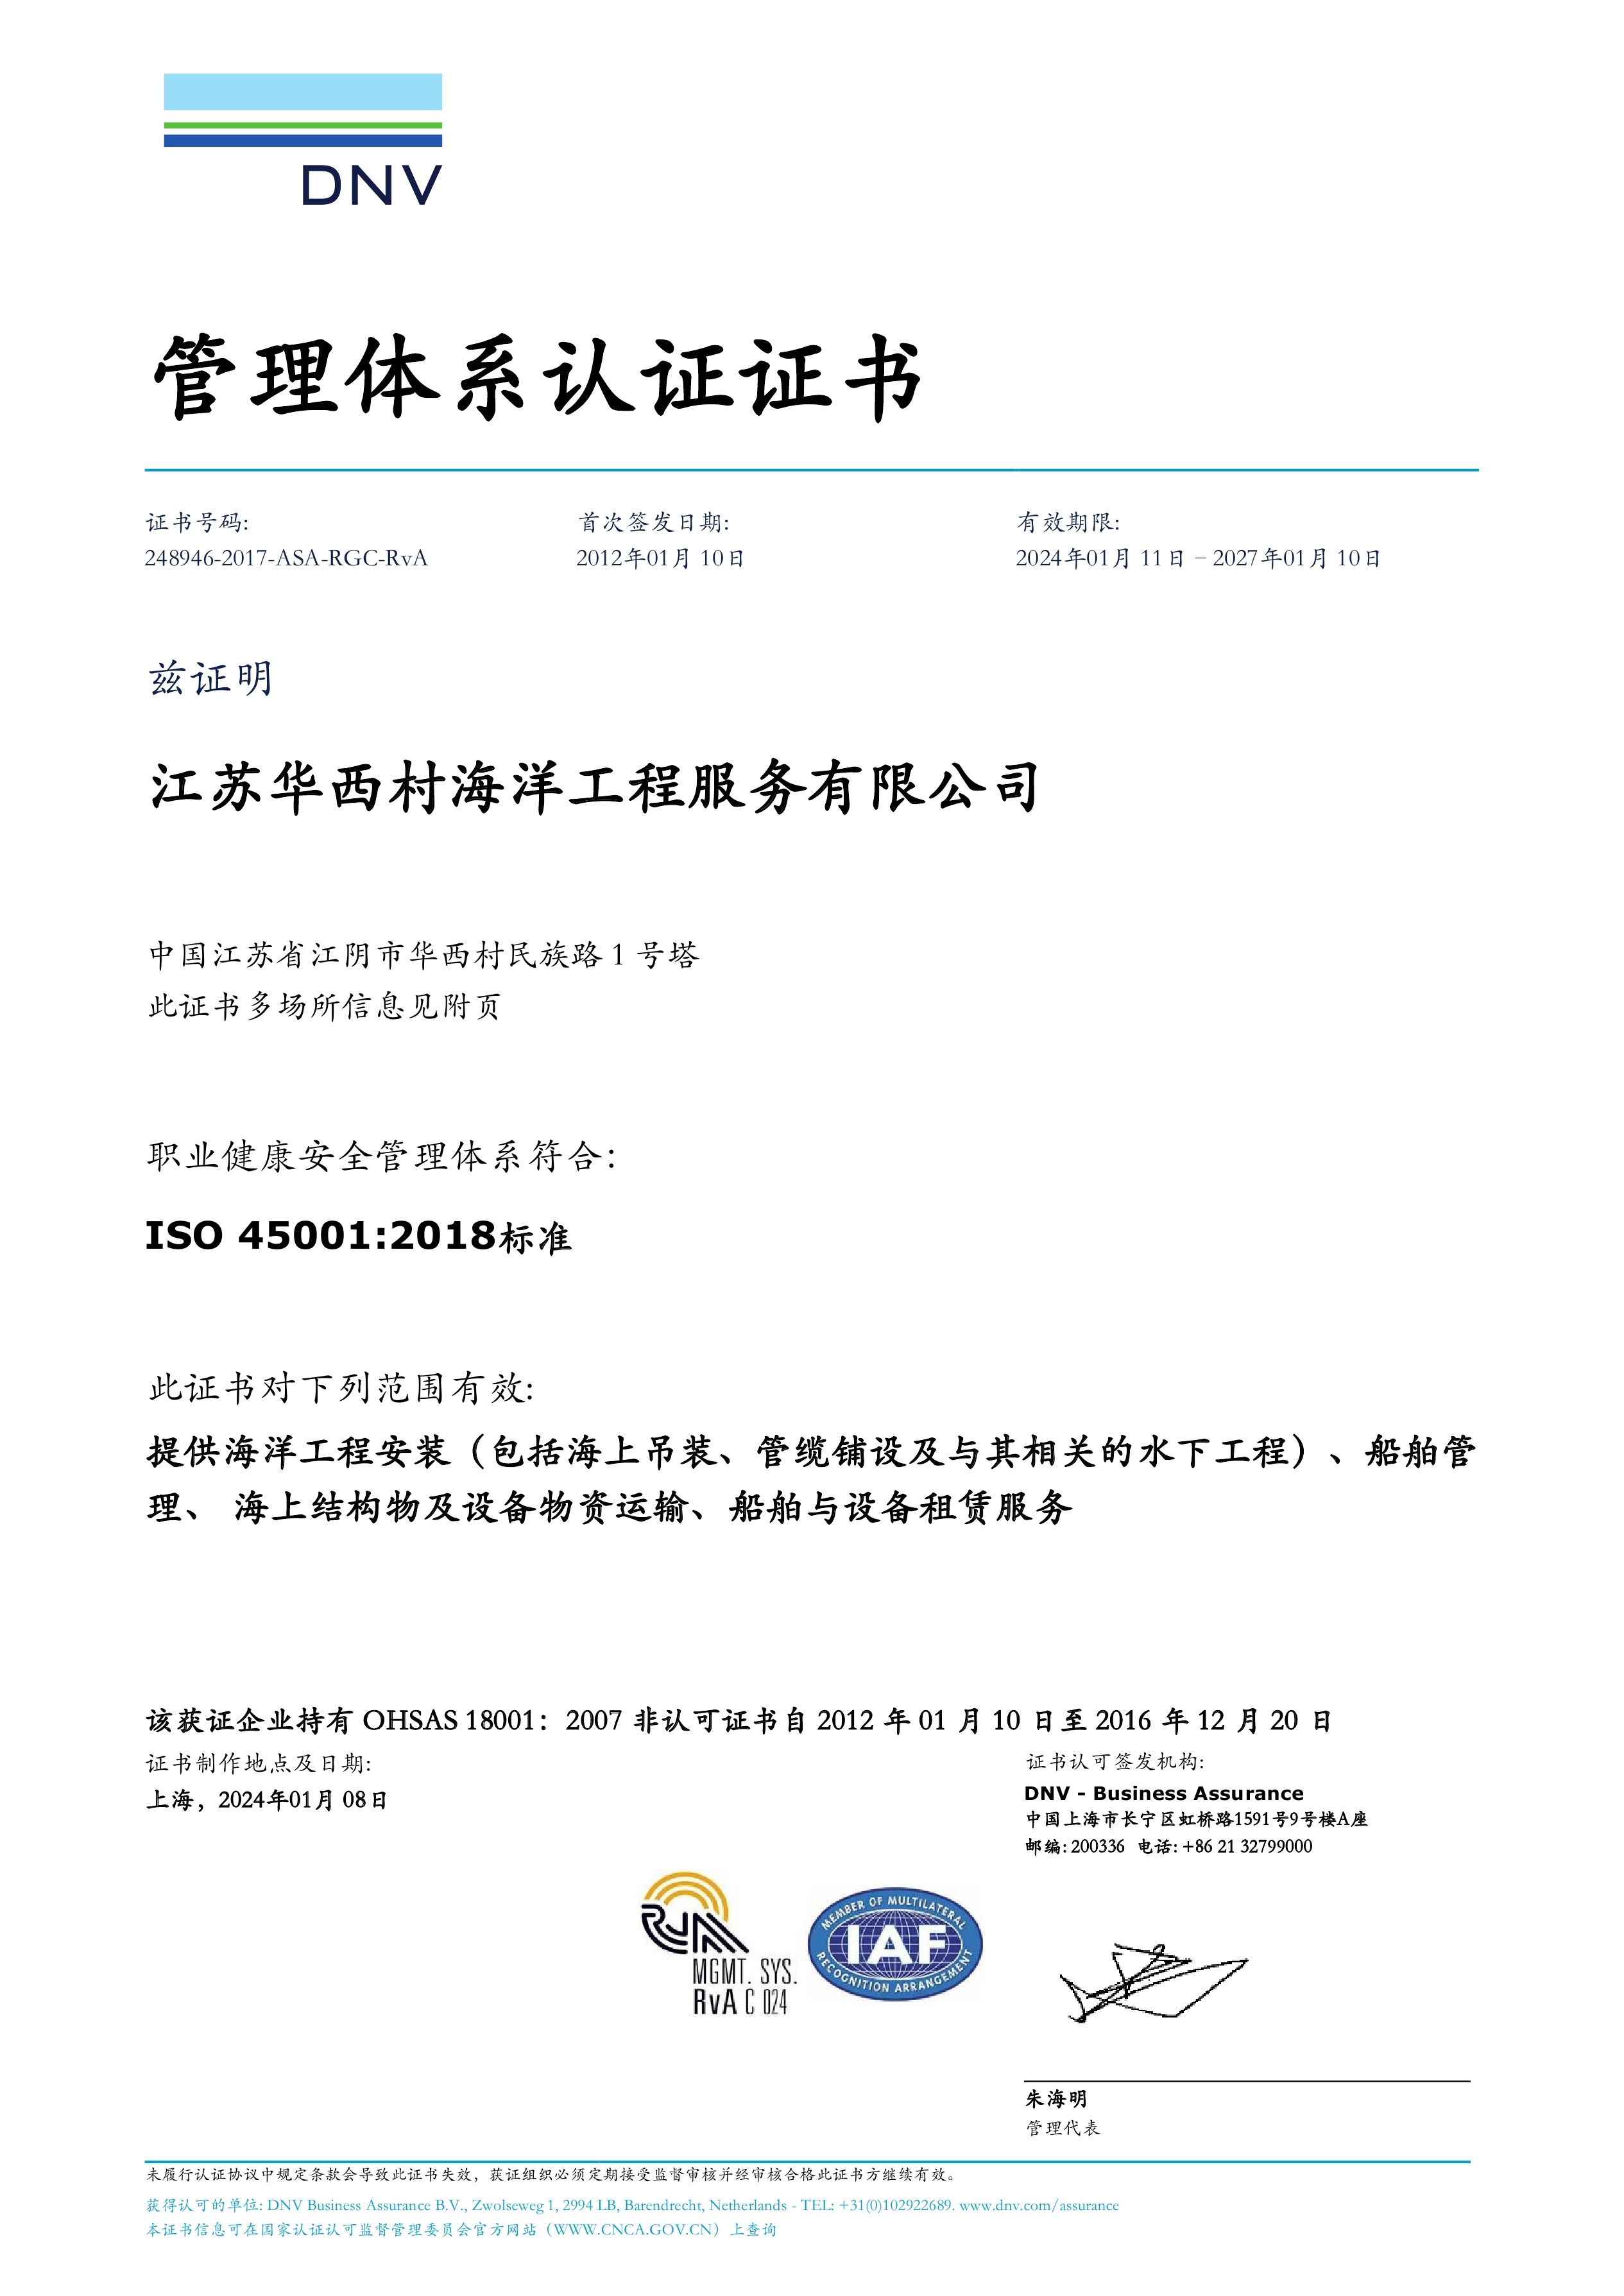 DNV Occupational Health and Safety Management System Certificate